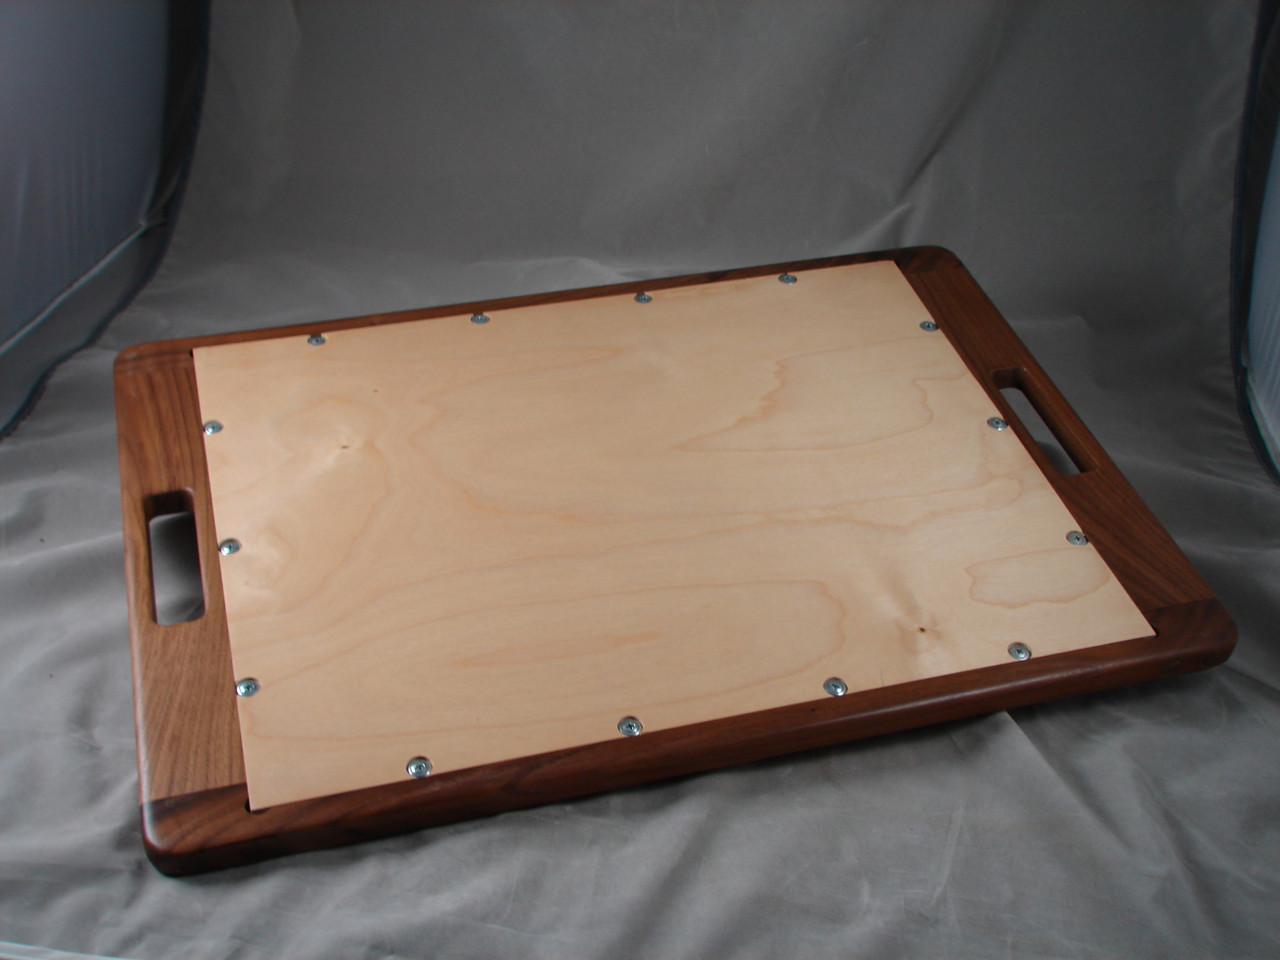 Removeable Bottom of serving tray for ease of Laser Engraving